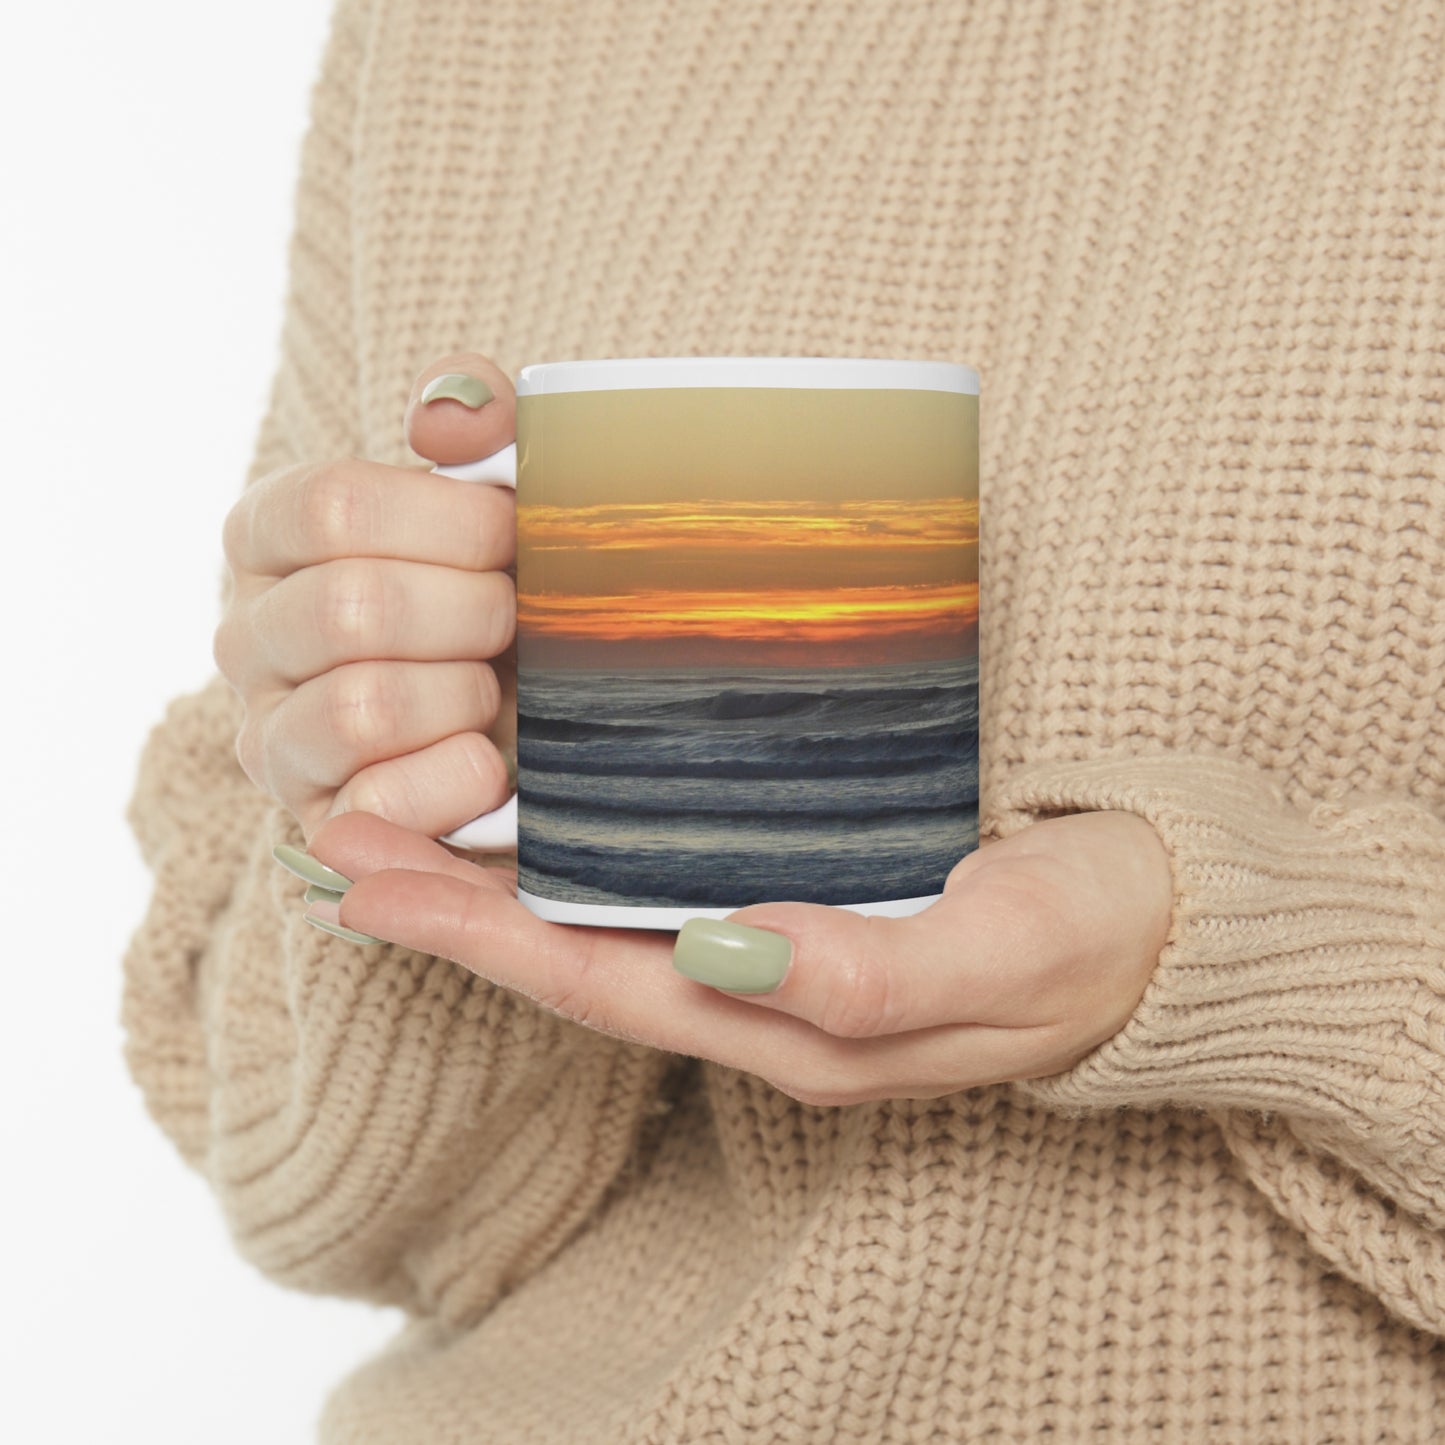 Mock up of the mug being held by a woman wearing a sweater